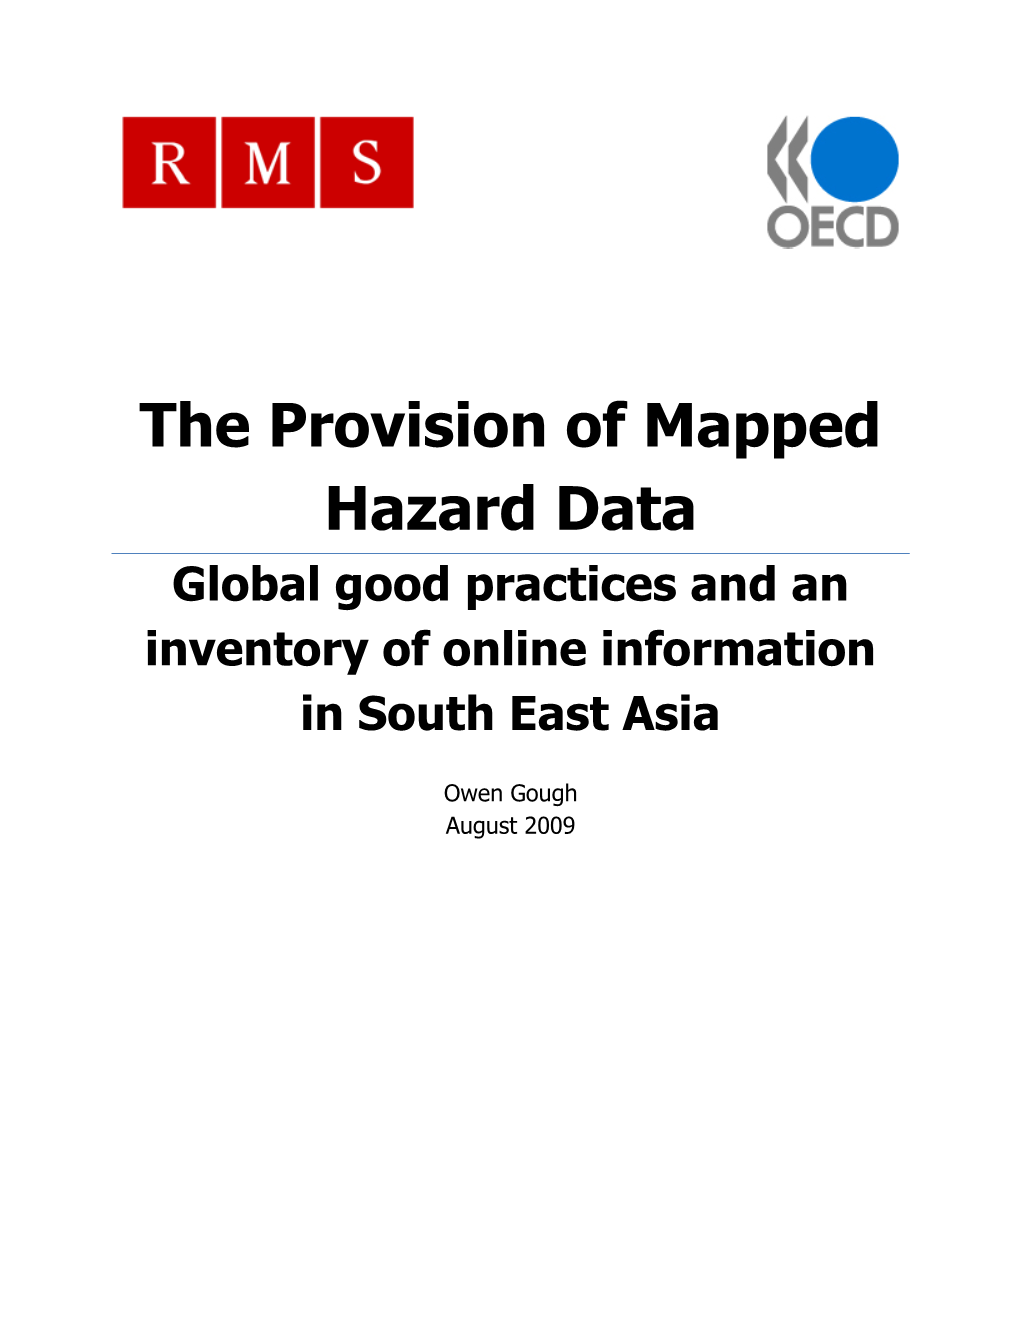 The Provision of Mapped Hazard Data Global Good Practices and an Inventory of Online Information in South East Asia